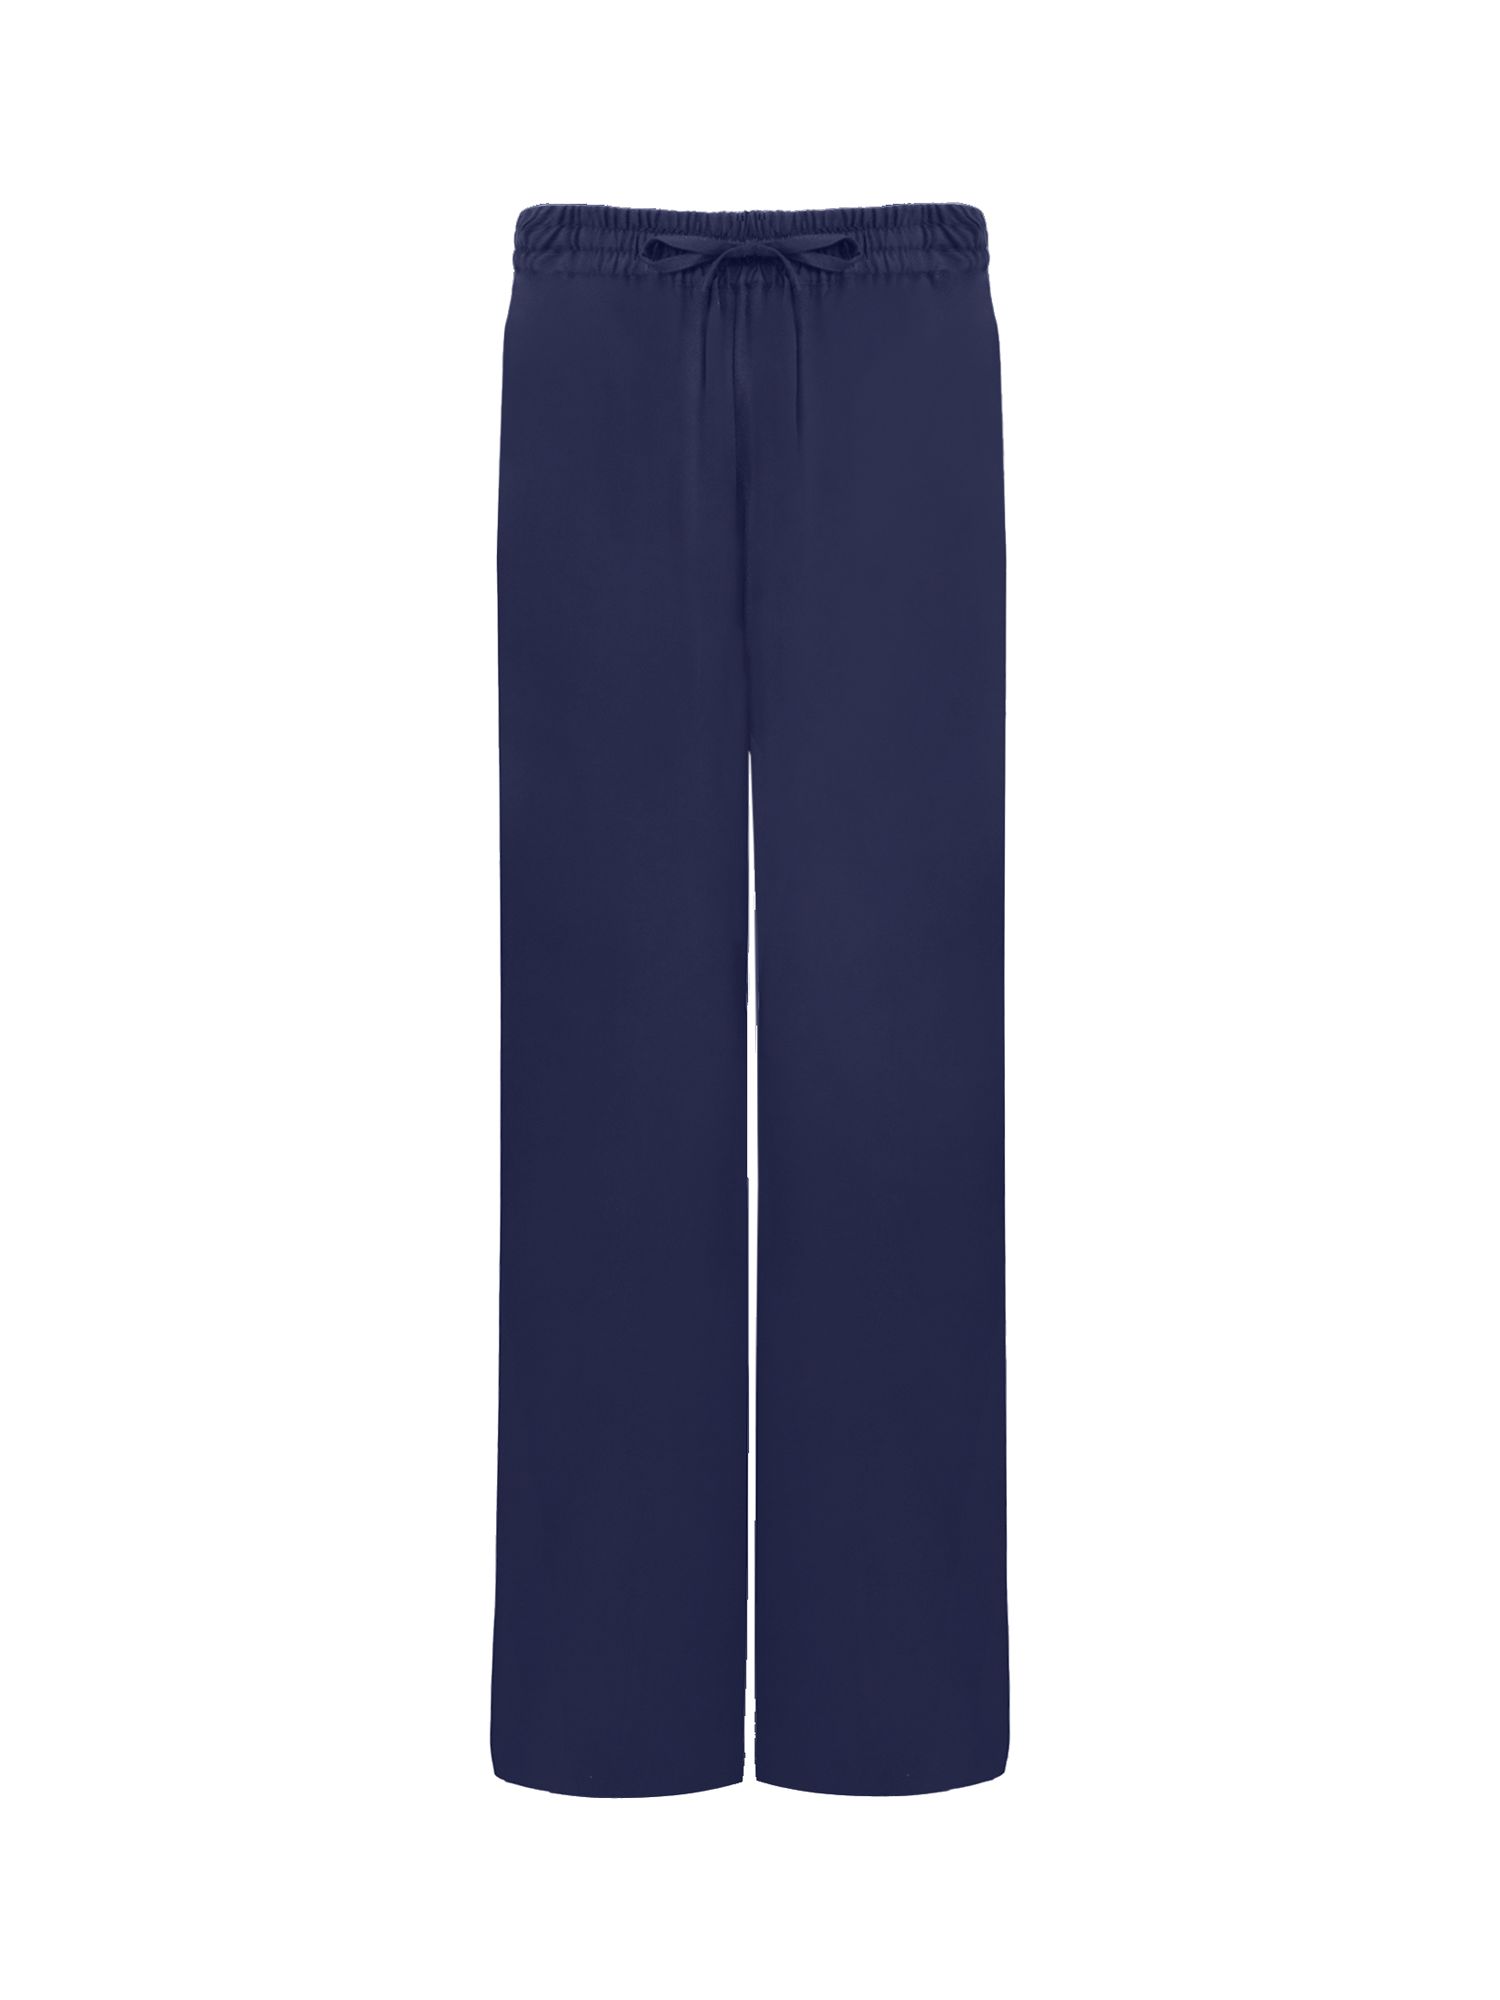 Ro&Zo Petites Pull On Wide Leg Trousers, Navy at John Lewis & Partners